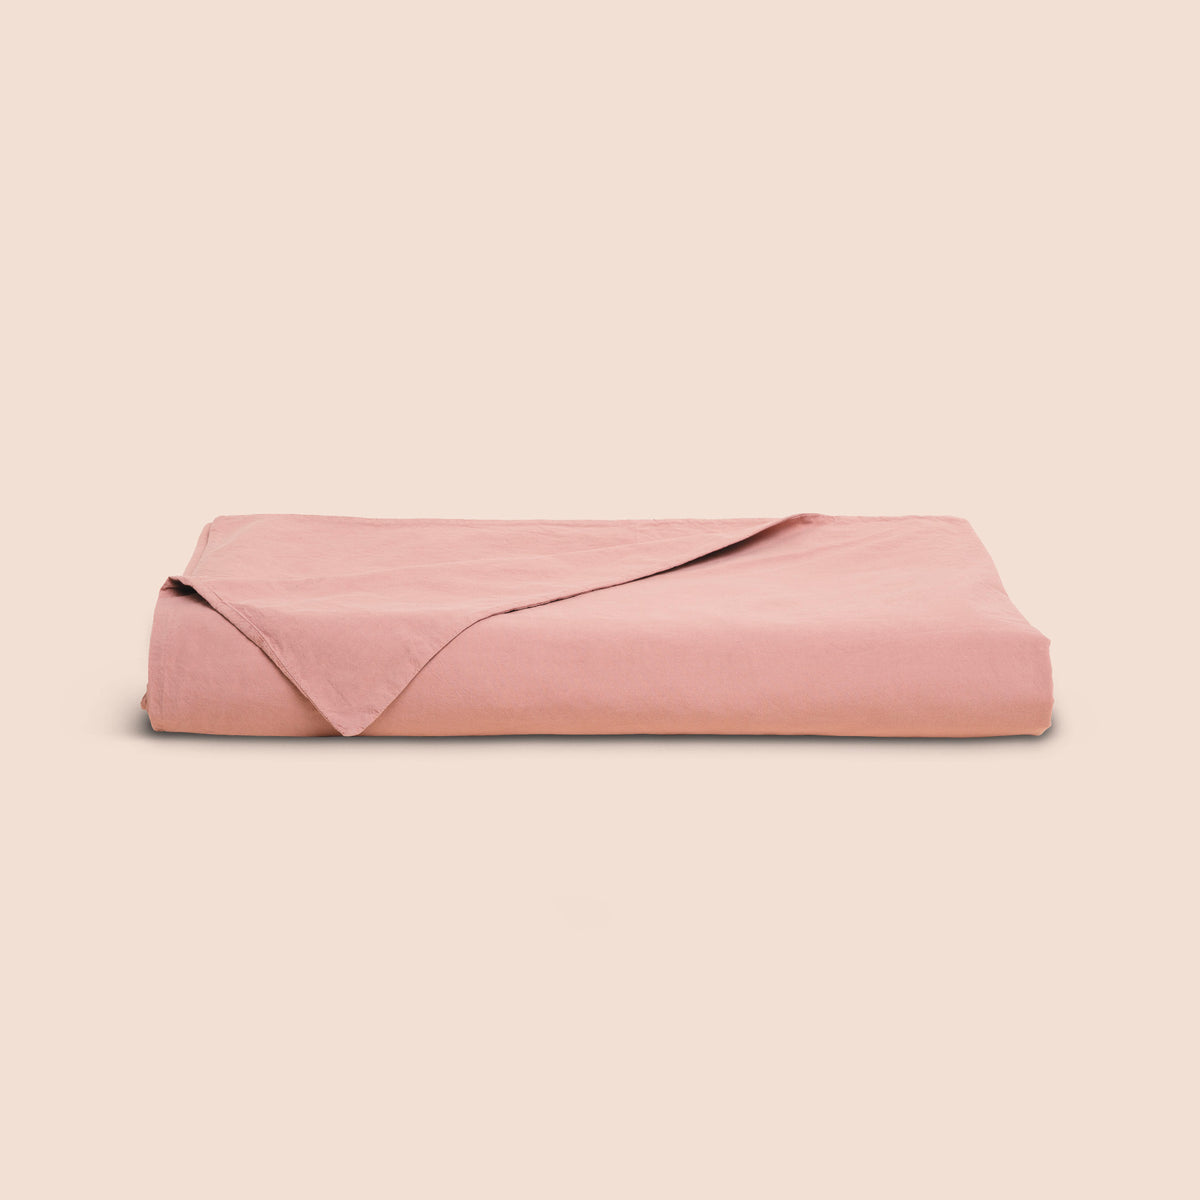 Image of a Pink Sandstone Garment Washed Percale Duvet Cover neatly folded with one corner draped towards the front on a light pink background